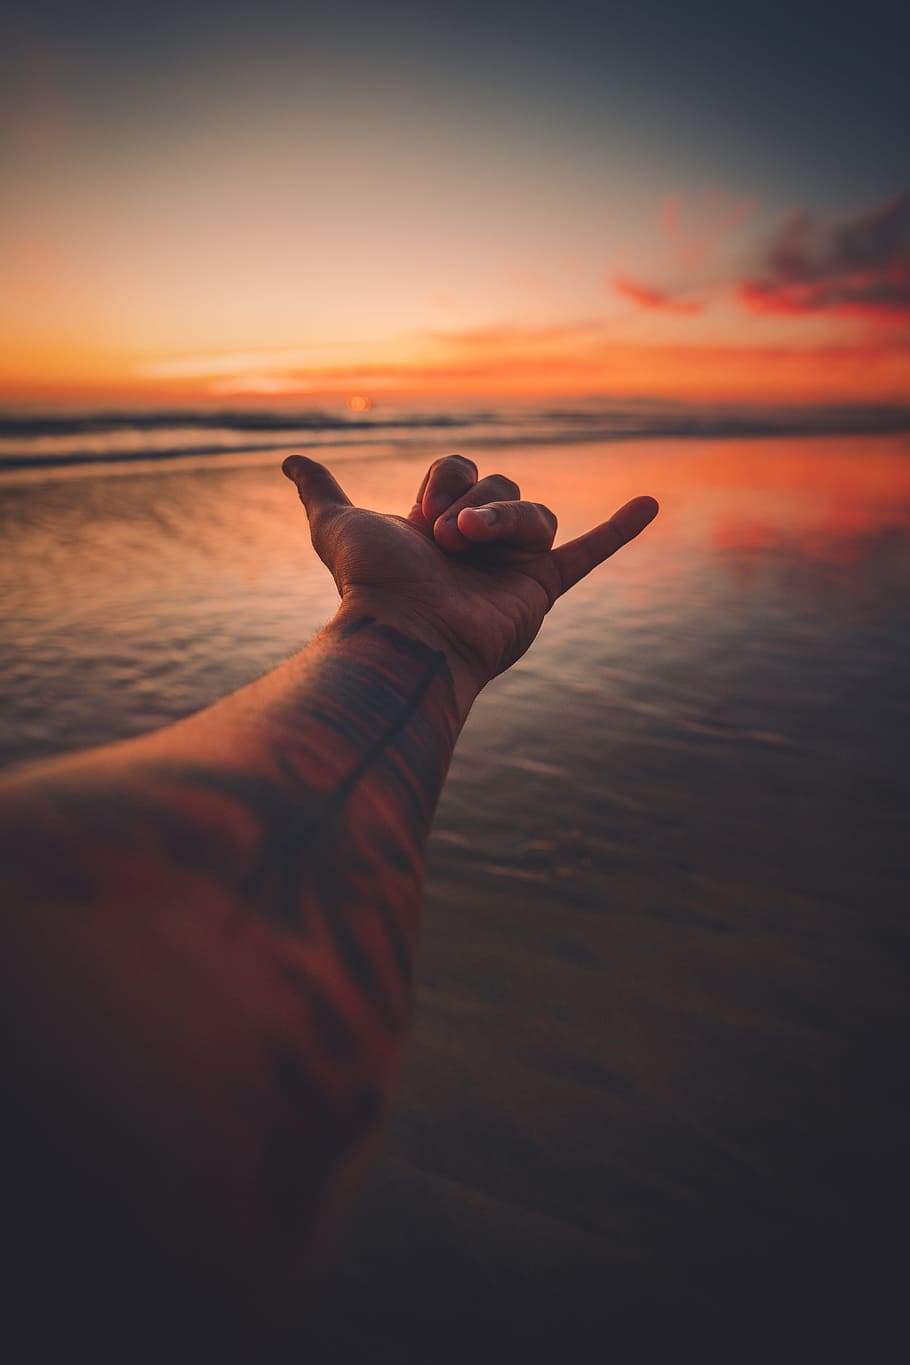 left person's hand, sign, chill, adventure, moody, red, dusk